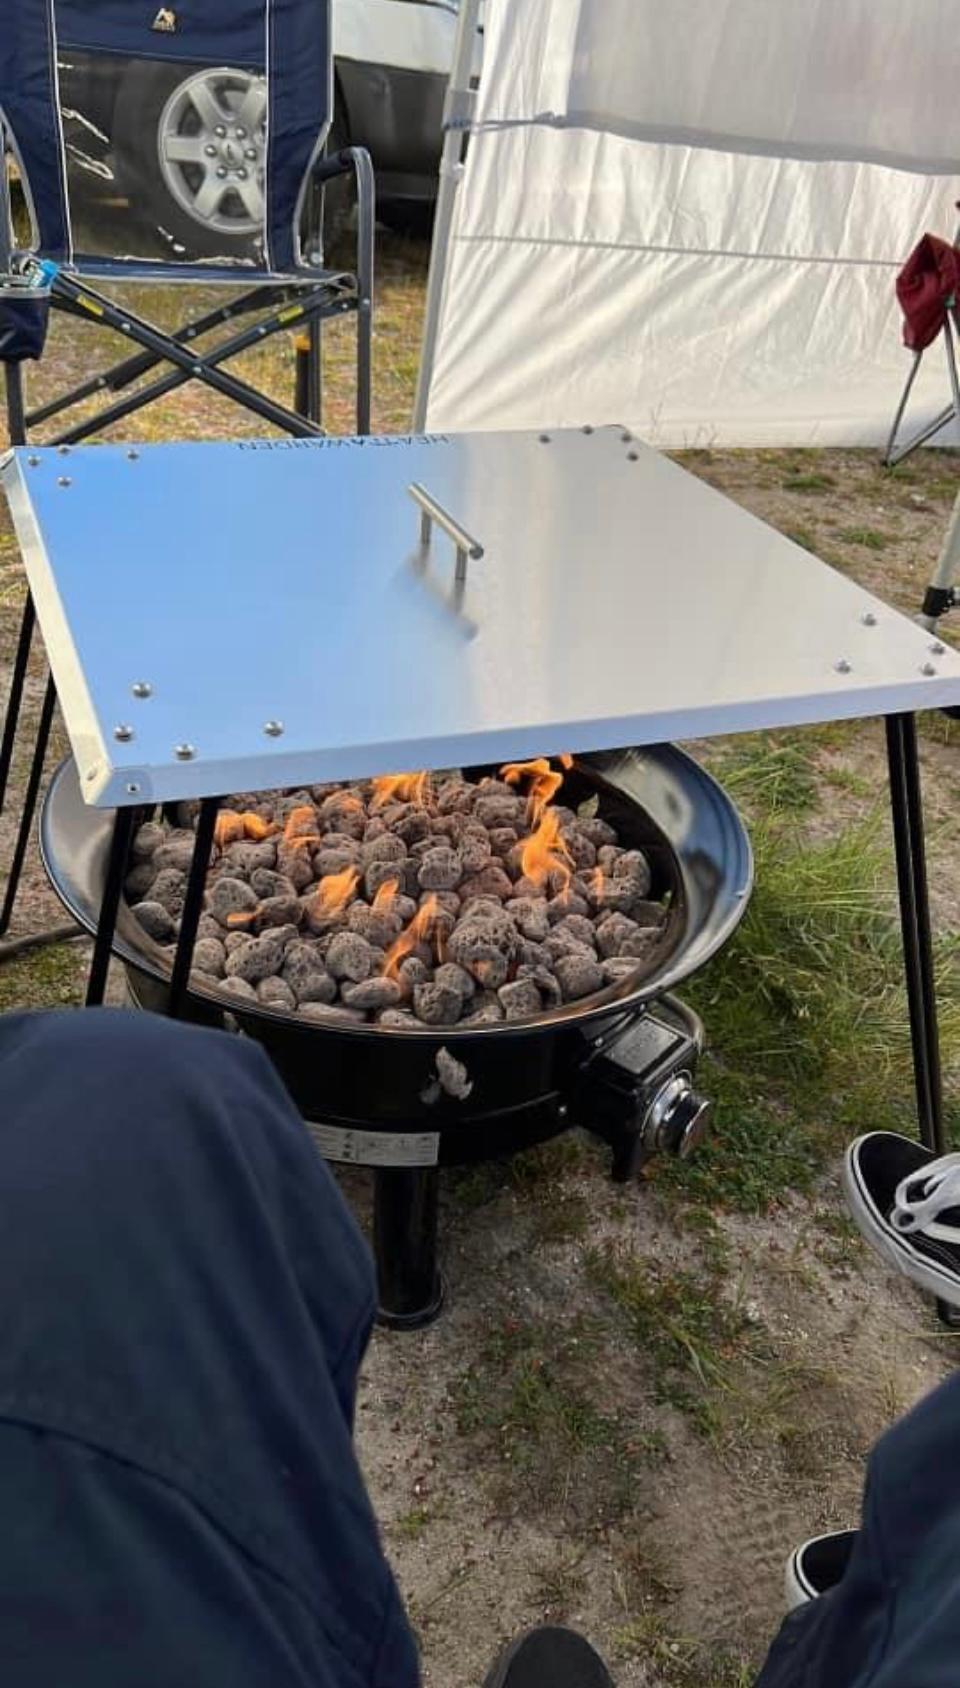 A “MUST HAVE” for Camping. Heat Warden® USA QUALITY 24"x 24" Camping Square Heat Deflector with 24" Foldable Legs. (See menu above for Specs.)